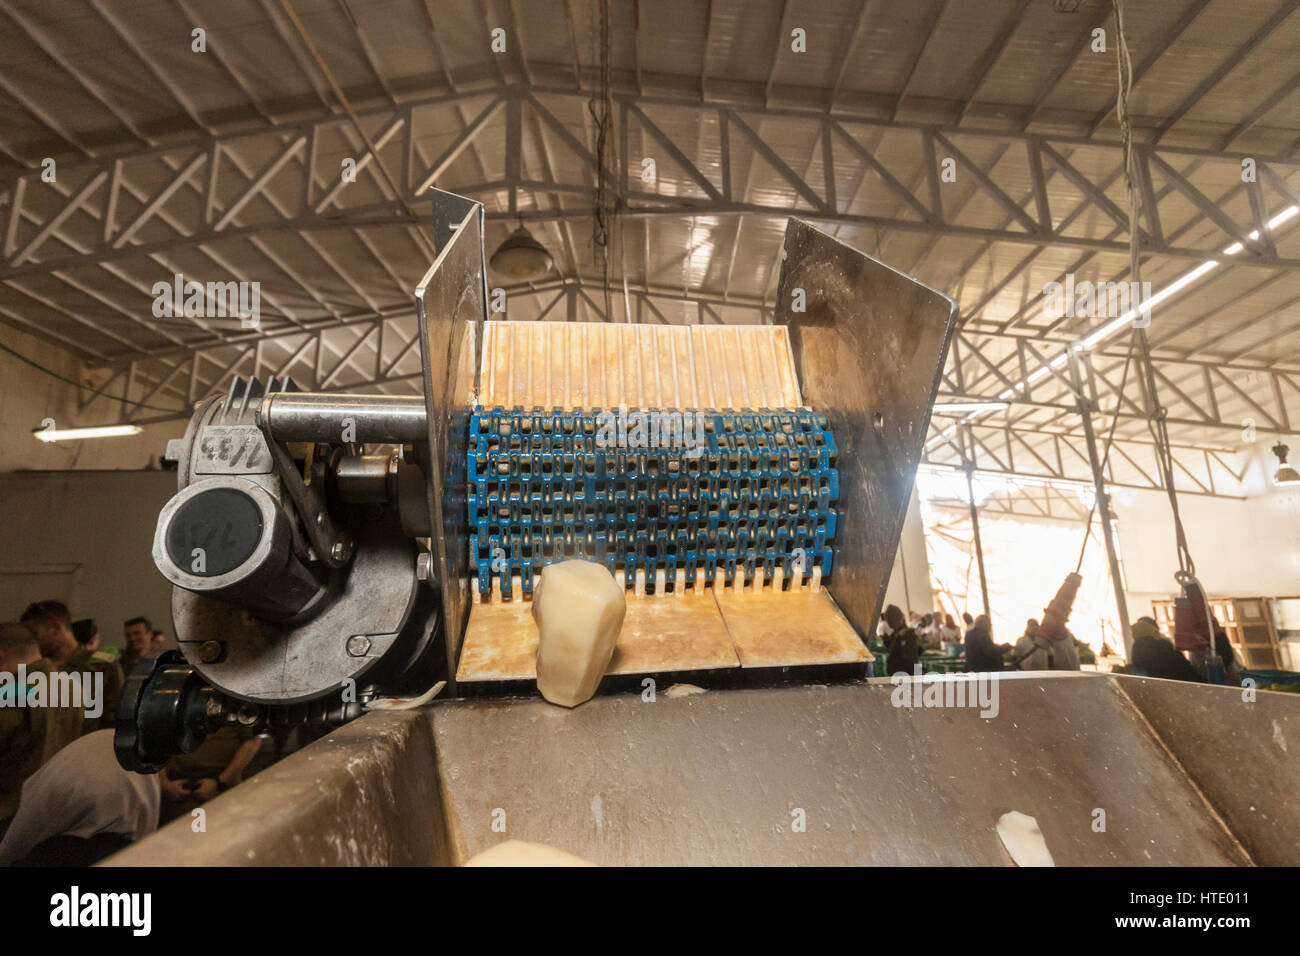 https://c8.alamy.com/comp/HTE011/a-potato-chips-french-fries-making-machine-in-action-HTE011.jpg